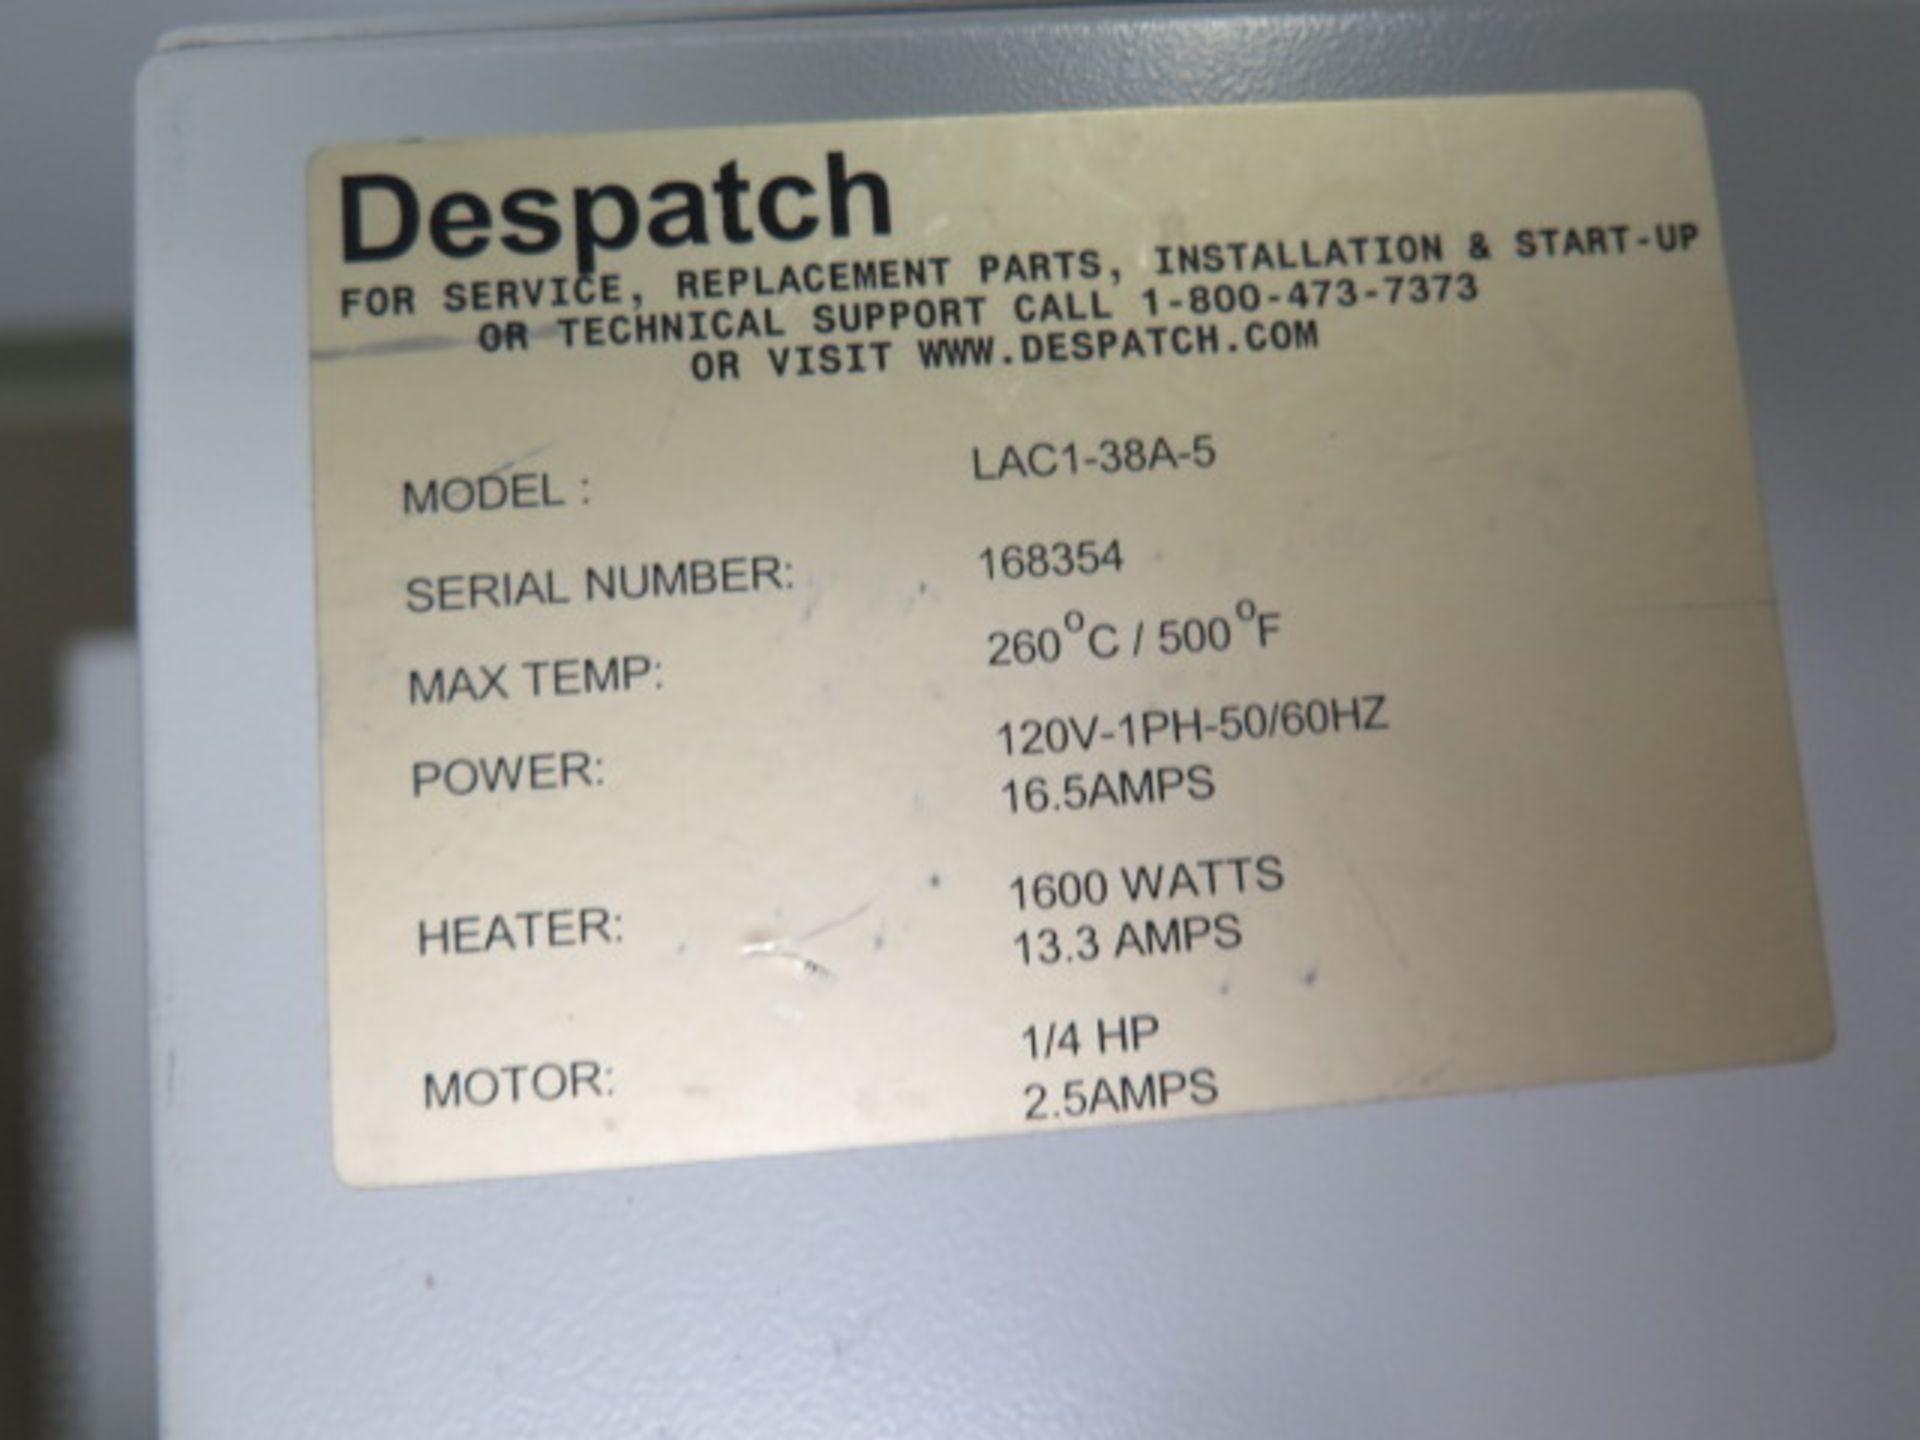 Despatch LAC1-38A-5 Oven s/n 168354 w/ MRC 5000 Recorder, heats to 260 C / 500 Degrees F, SOLD AS IS - Image 10 of 10